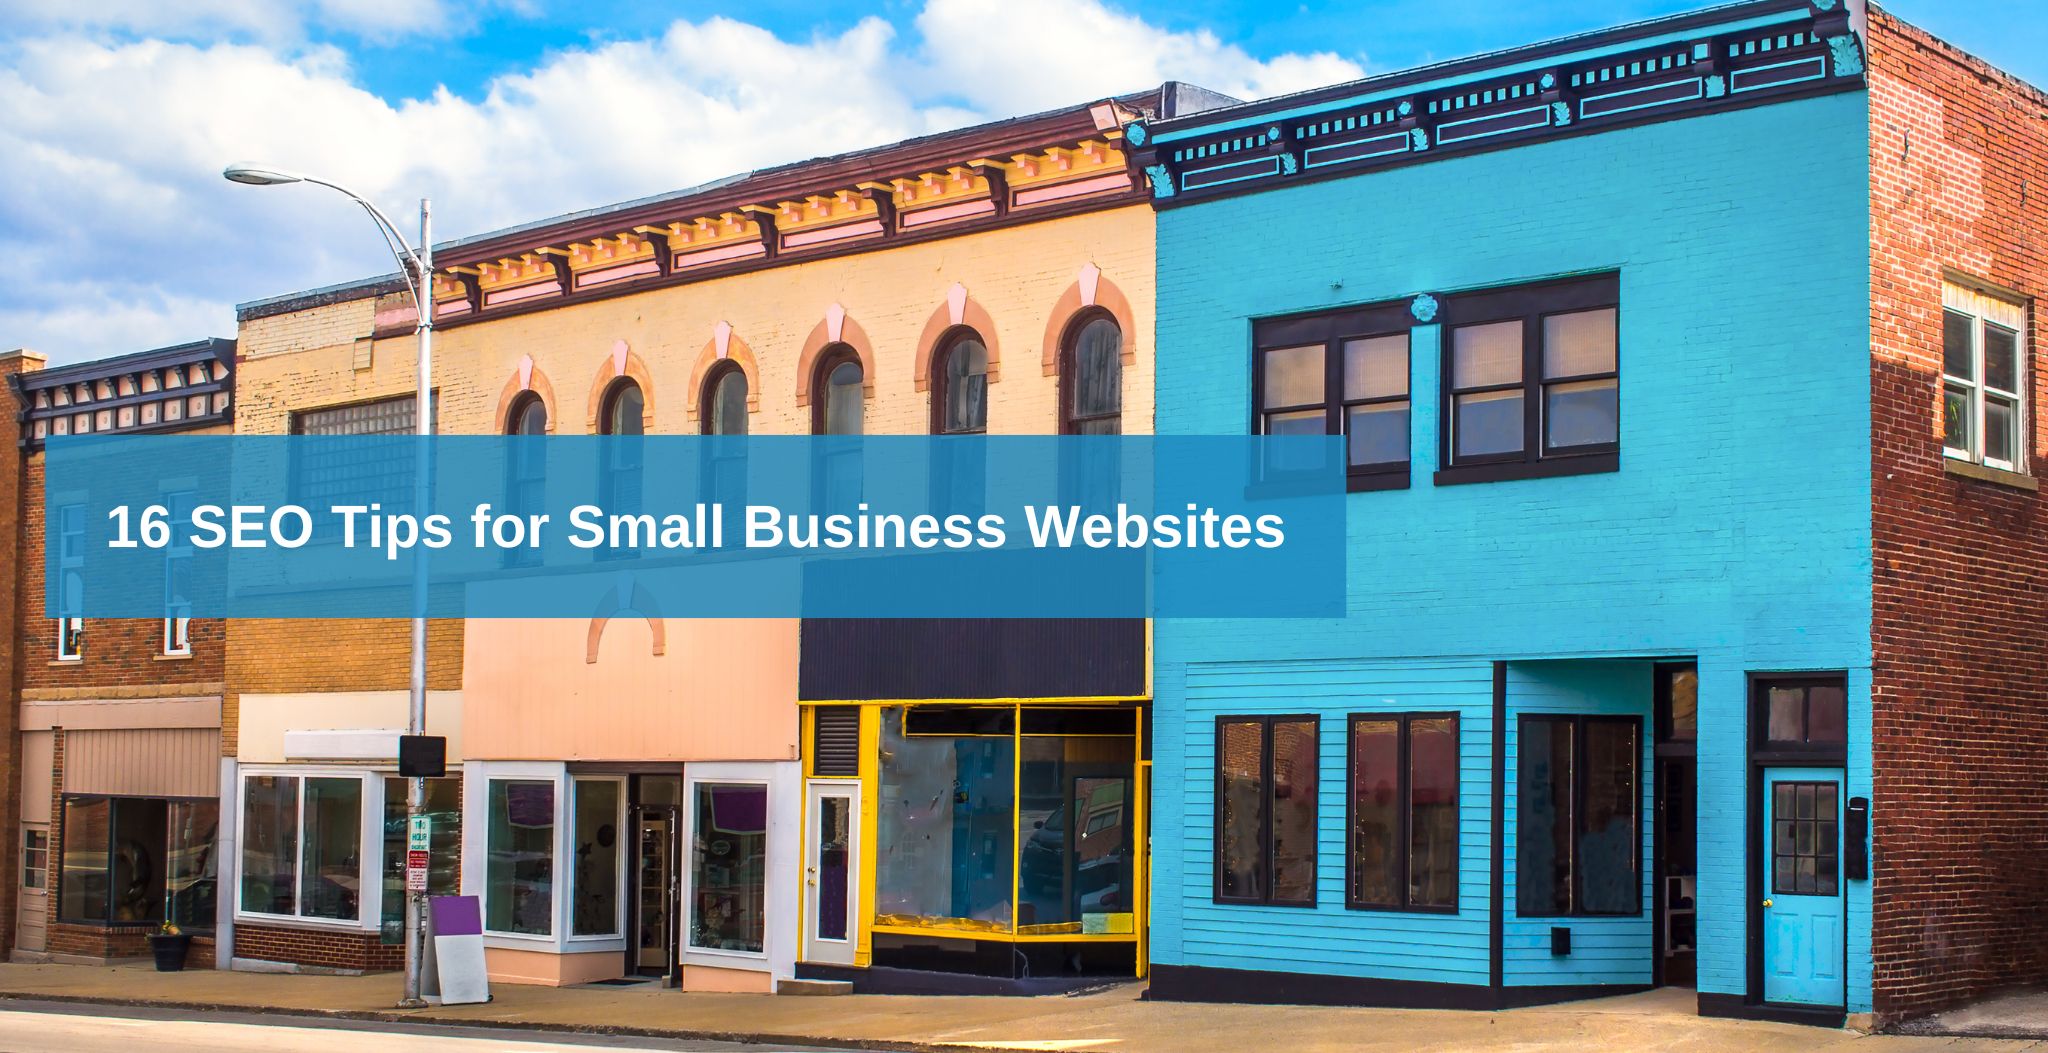 16 SEO Tips for Small Business Websites